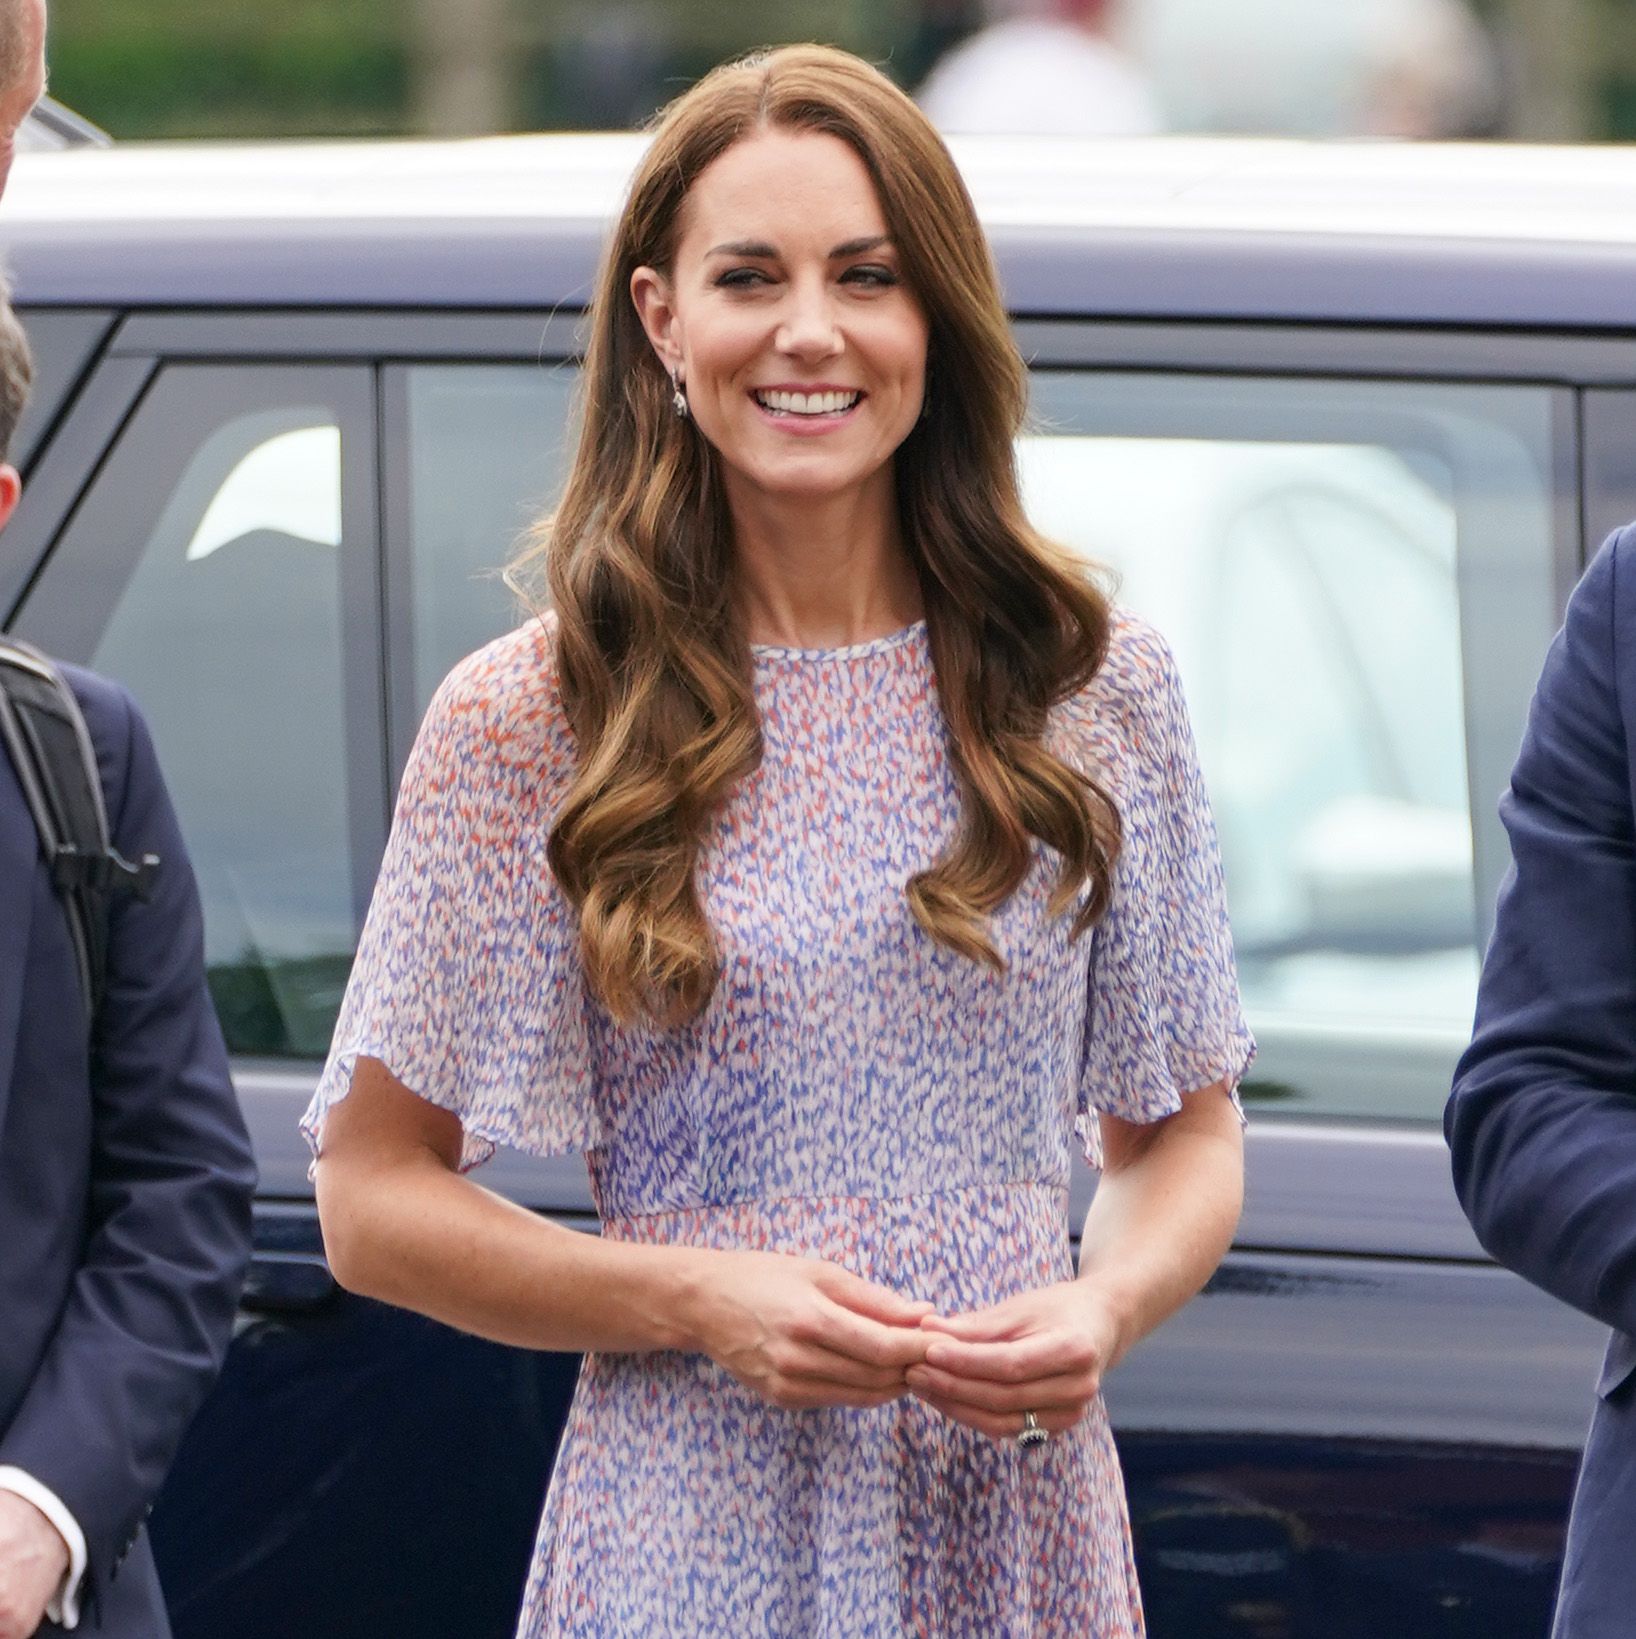 A Body Language Expert Says Kate Middleton Uses the 